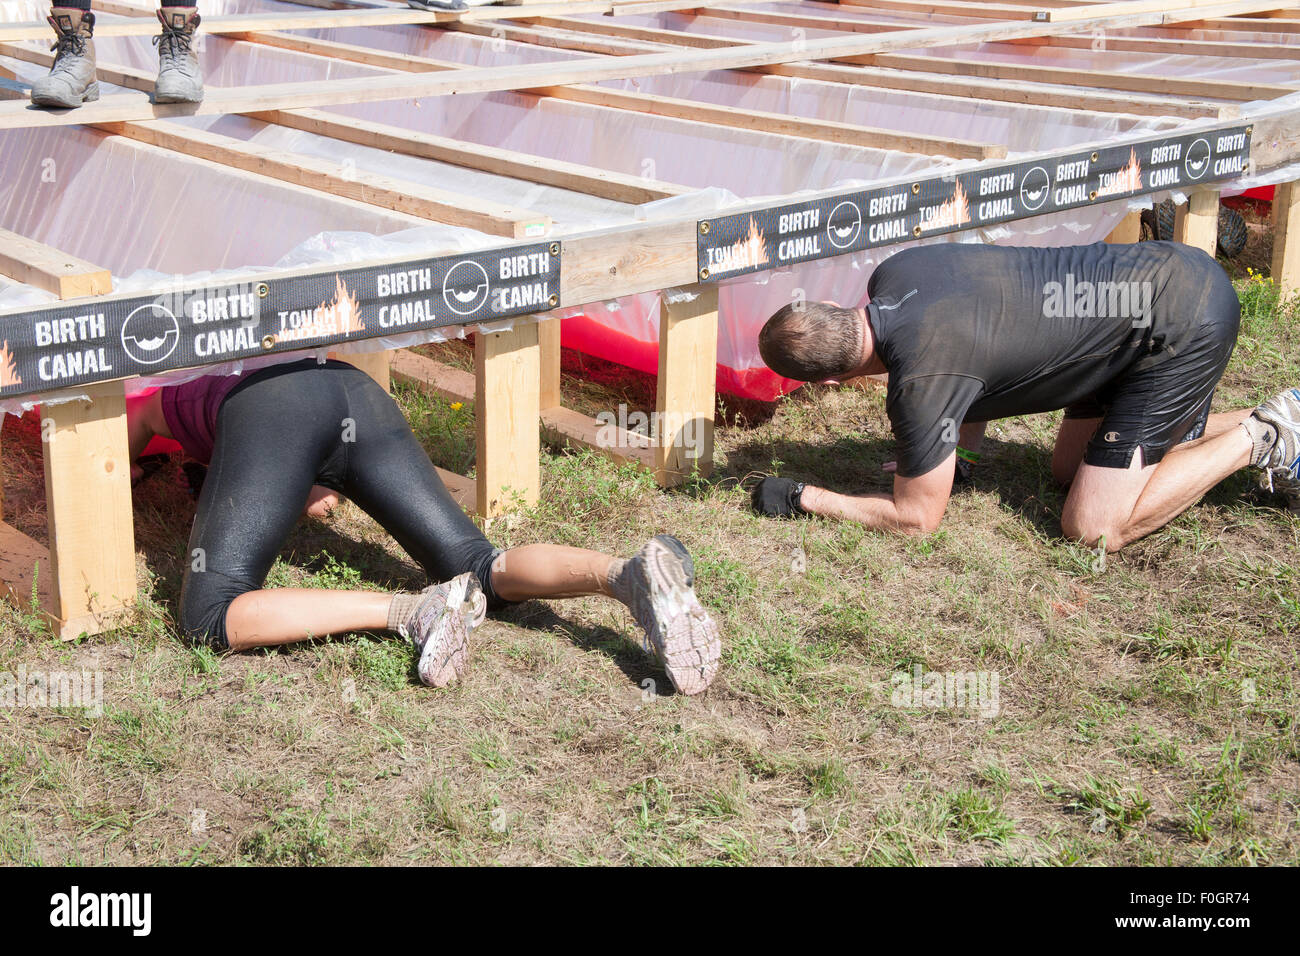 Toronto, Canada. 15th Aug, 2015. Tough Mudder Obstacle Course Aug 15 2015 Toronto Ontario. Birth Canal obstacle Credit:  Performance Image/Alamy Live News Stock Photo